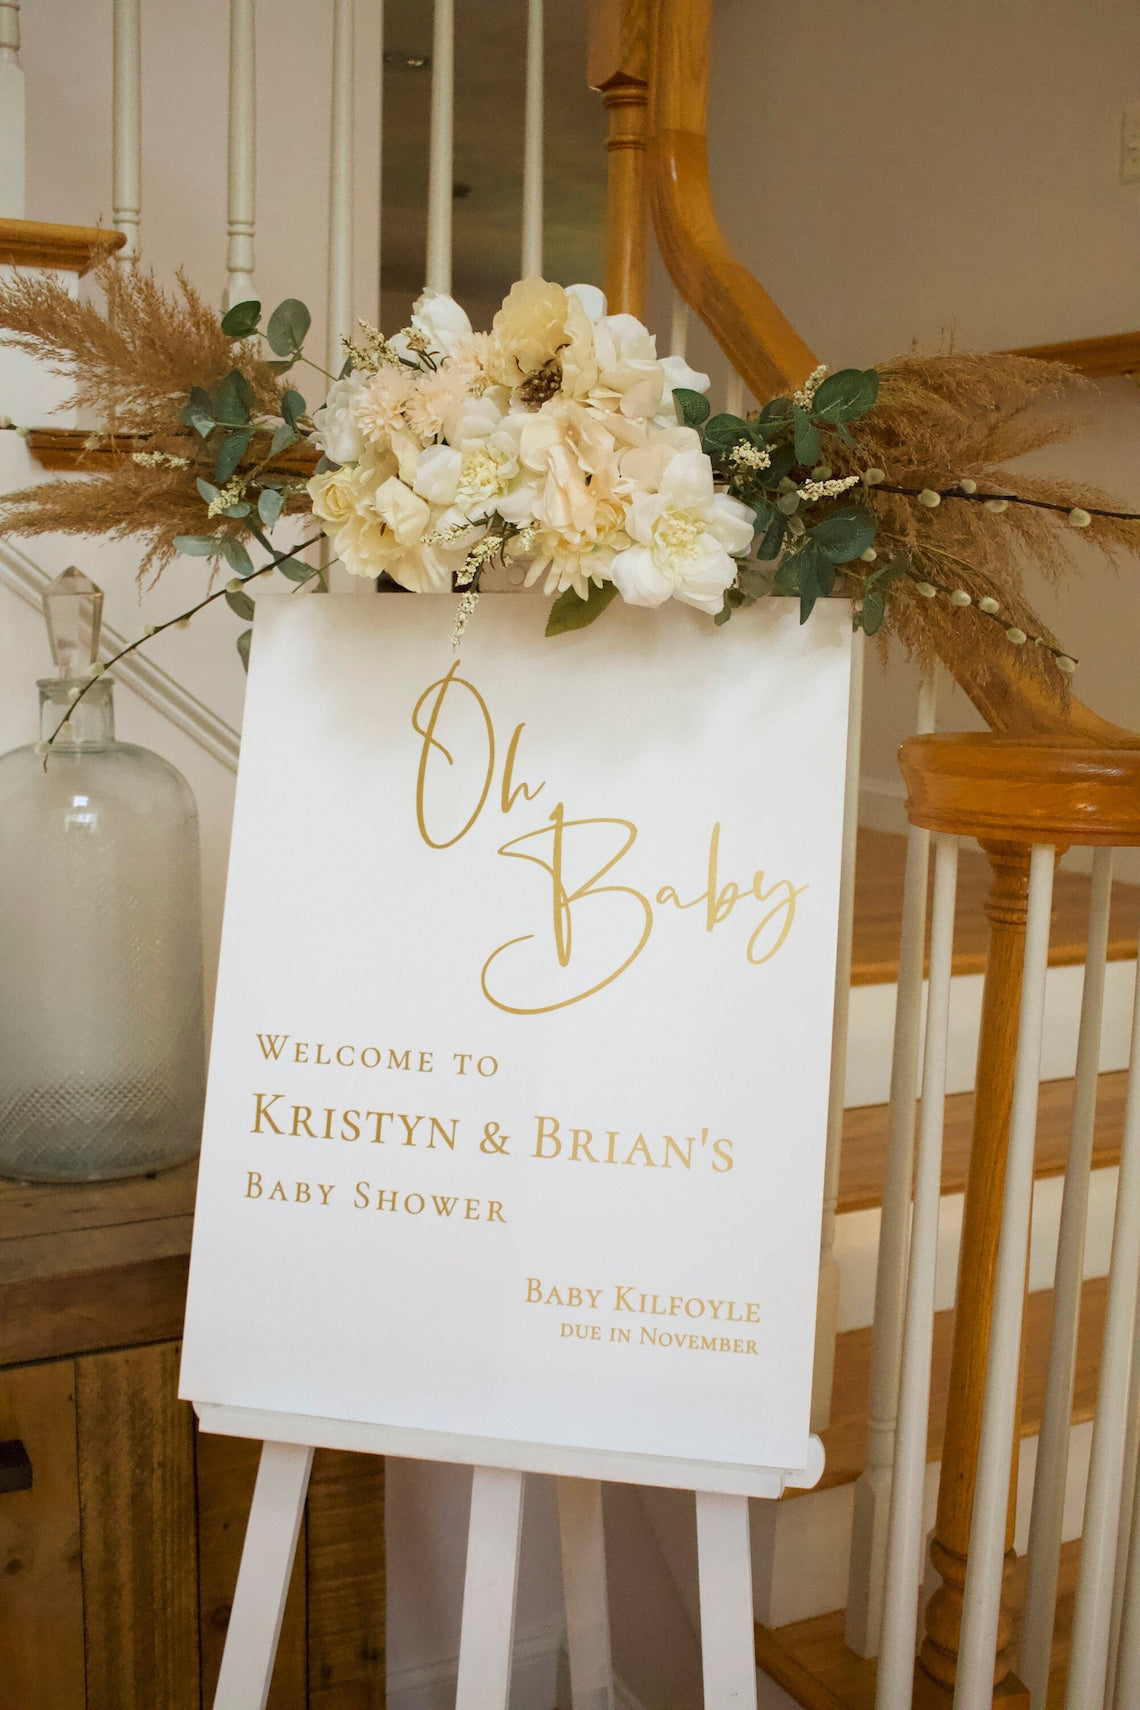 Acrylic Baby Shower Welcome Sign. Customizable designs, fonts and dates for weddings, birthdays, bridal/baby showers, retirements or any other event you wish to celebrate. Place this sign at the entrance of your event to welcome your guests in style and simplicity. thequinnandcompany. www.thequinnandcompany.com.